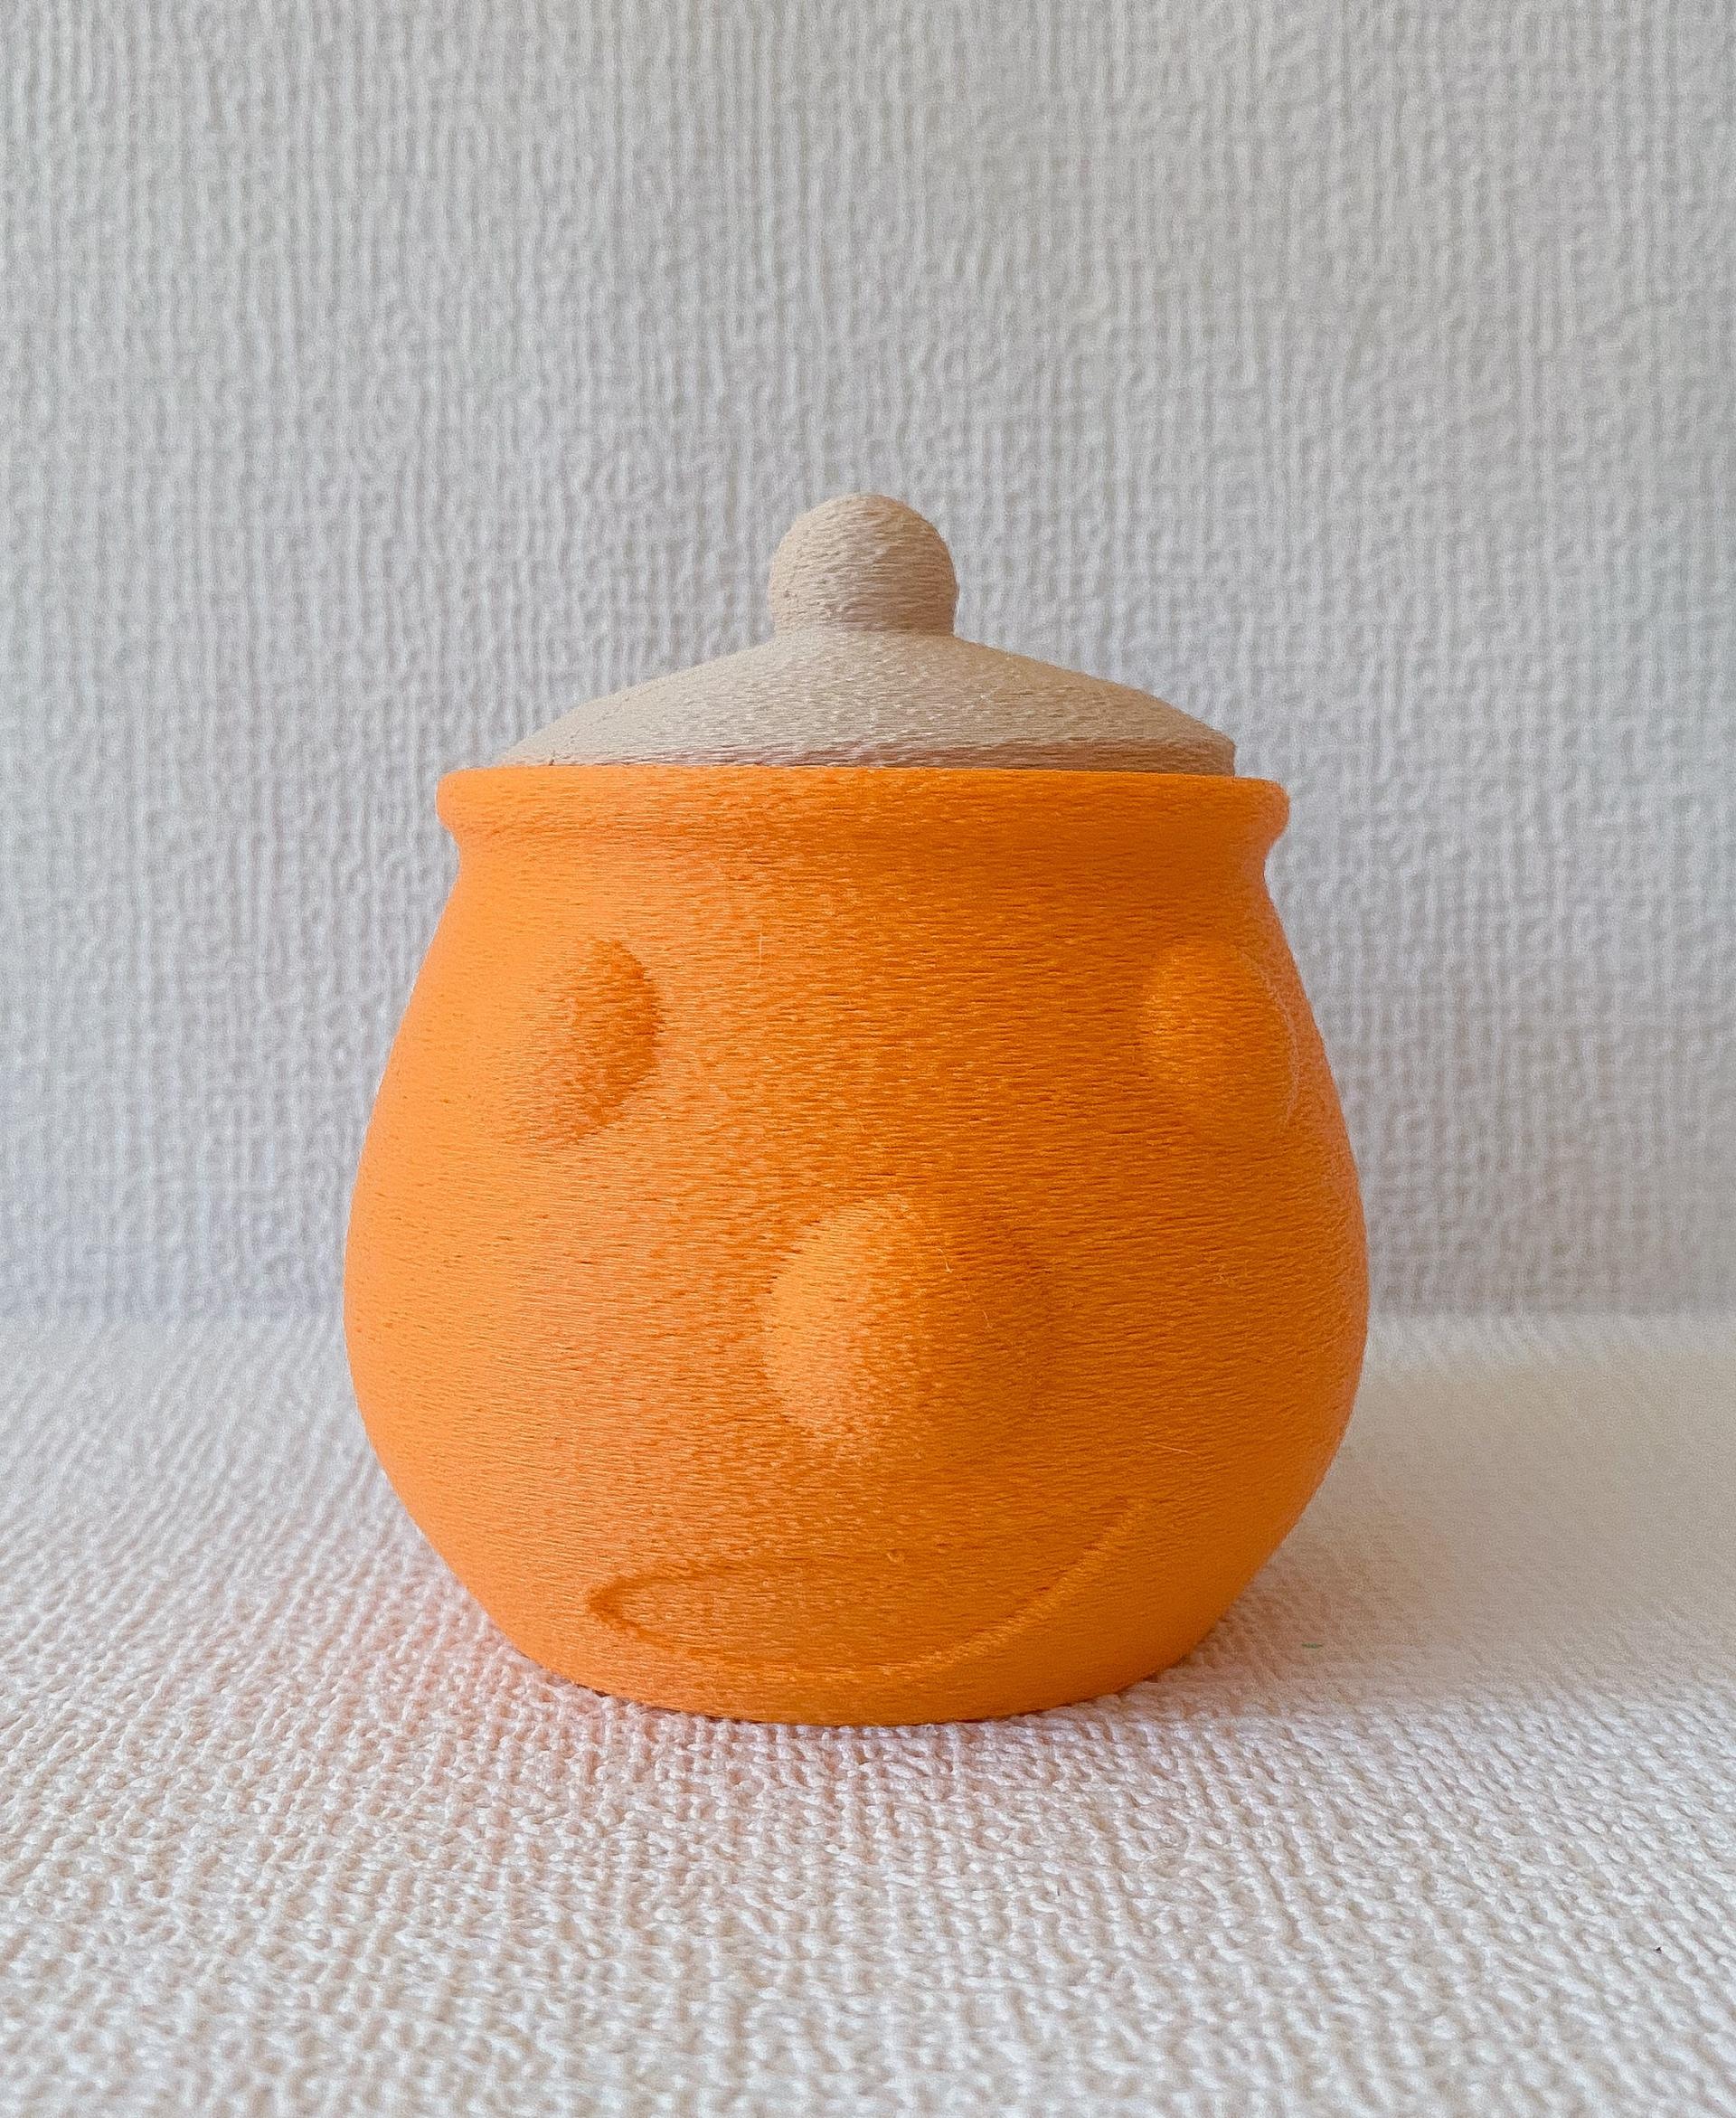 Toy Bowl with lid - Printed in FUZZY skin.
Polymaker filament. - 3d model